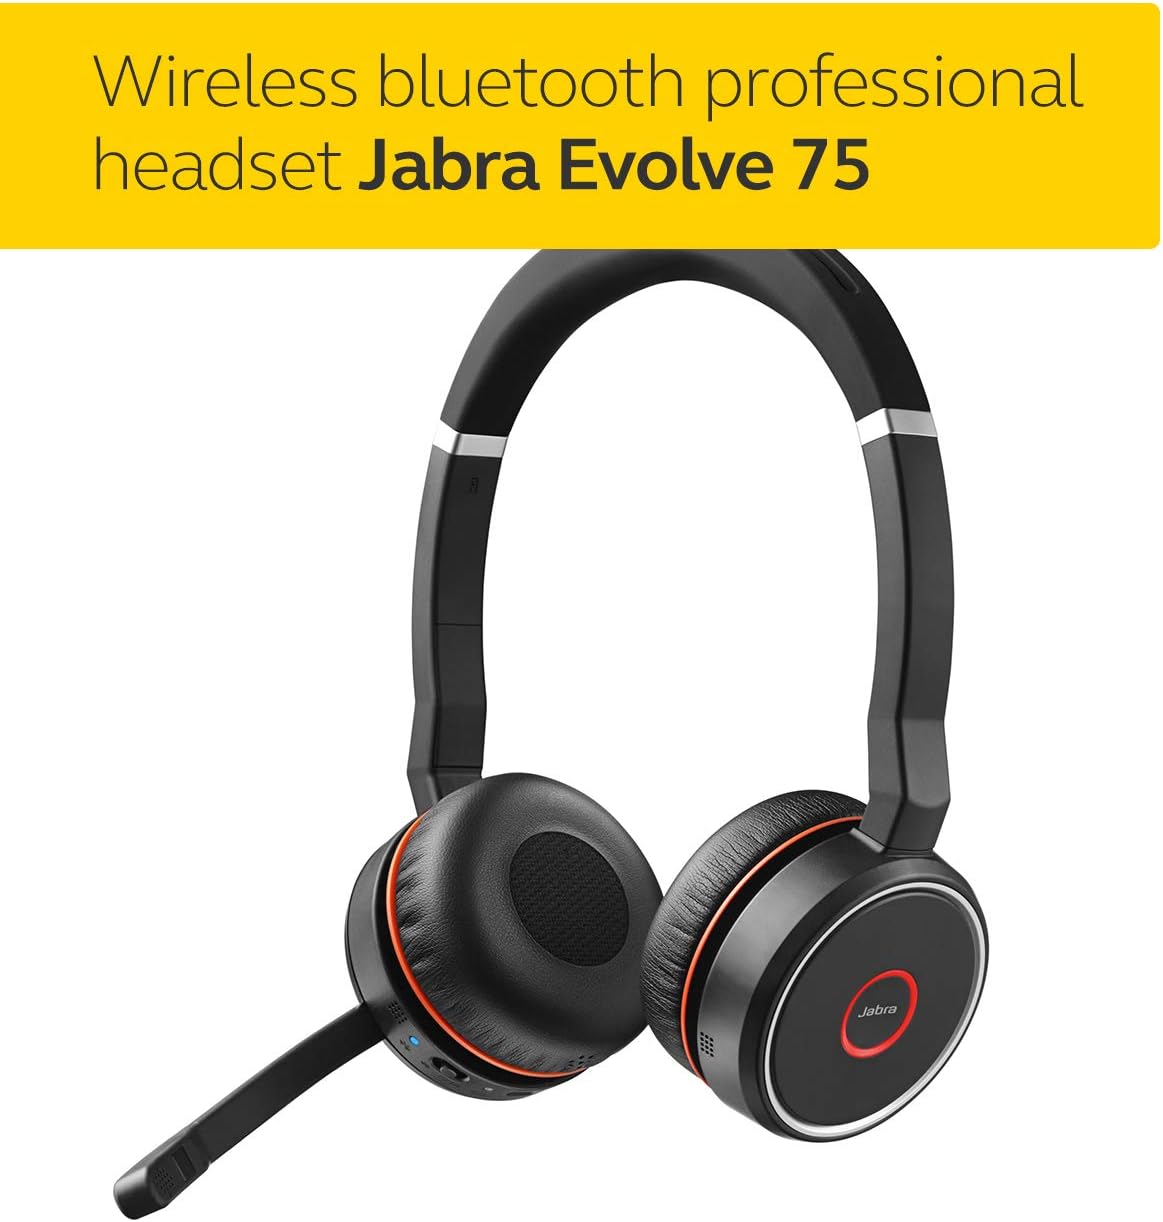 Jabra Evolve 75 UC Wireless Headset Bluetooth Headset with World-Class Speakers, Active Noise-Cancelling Microphone, Refurbished